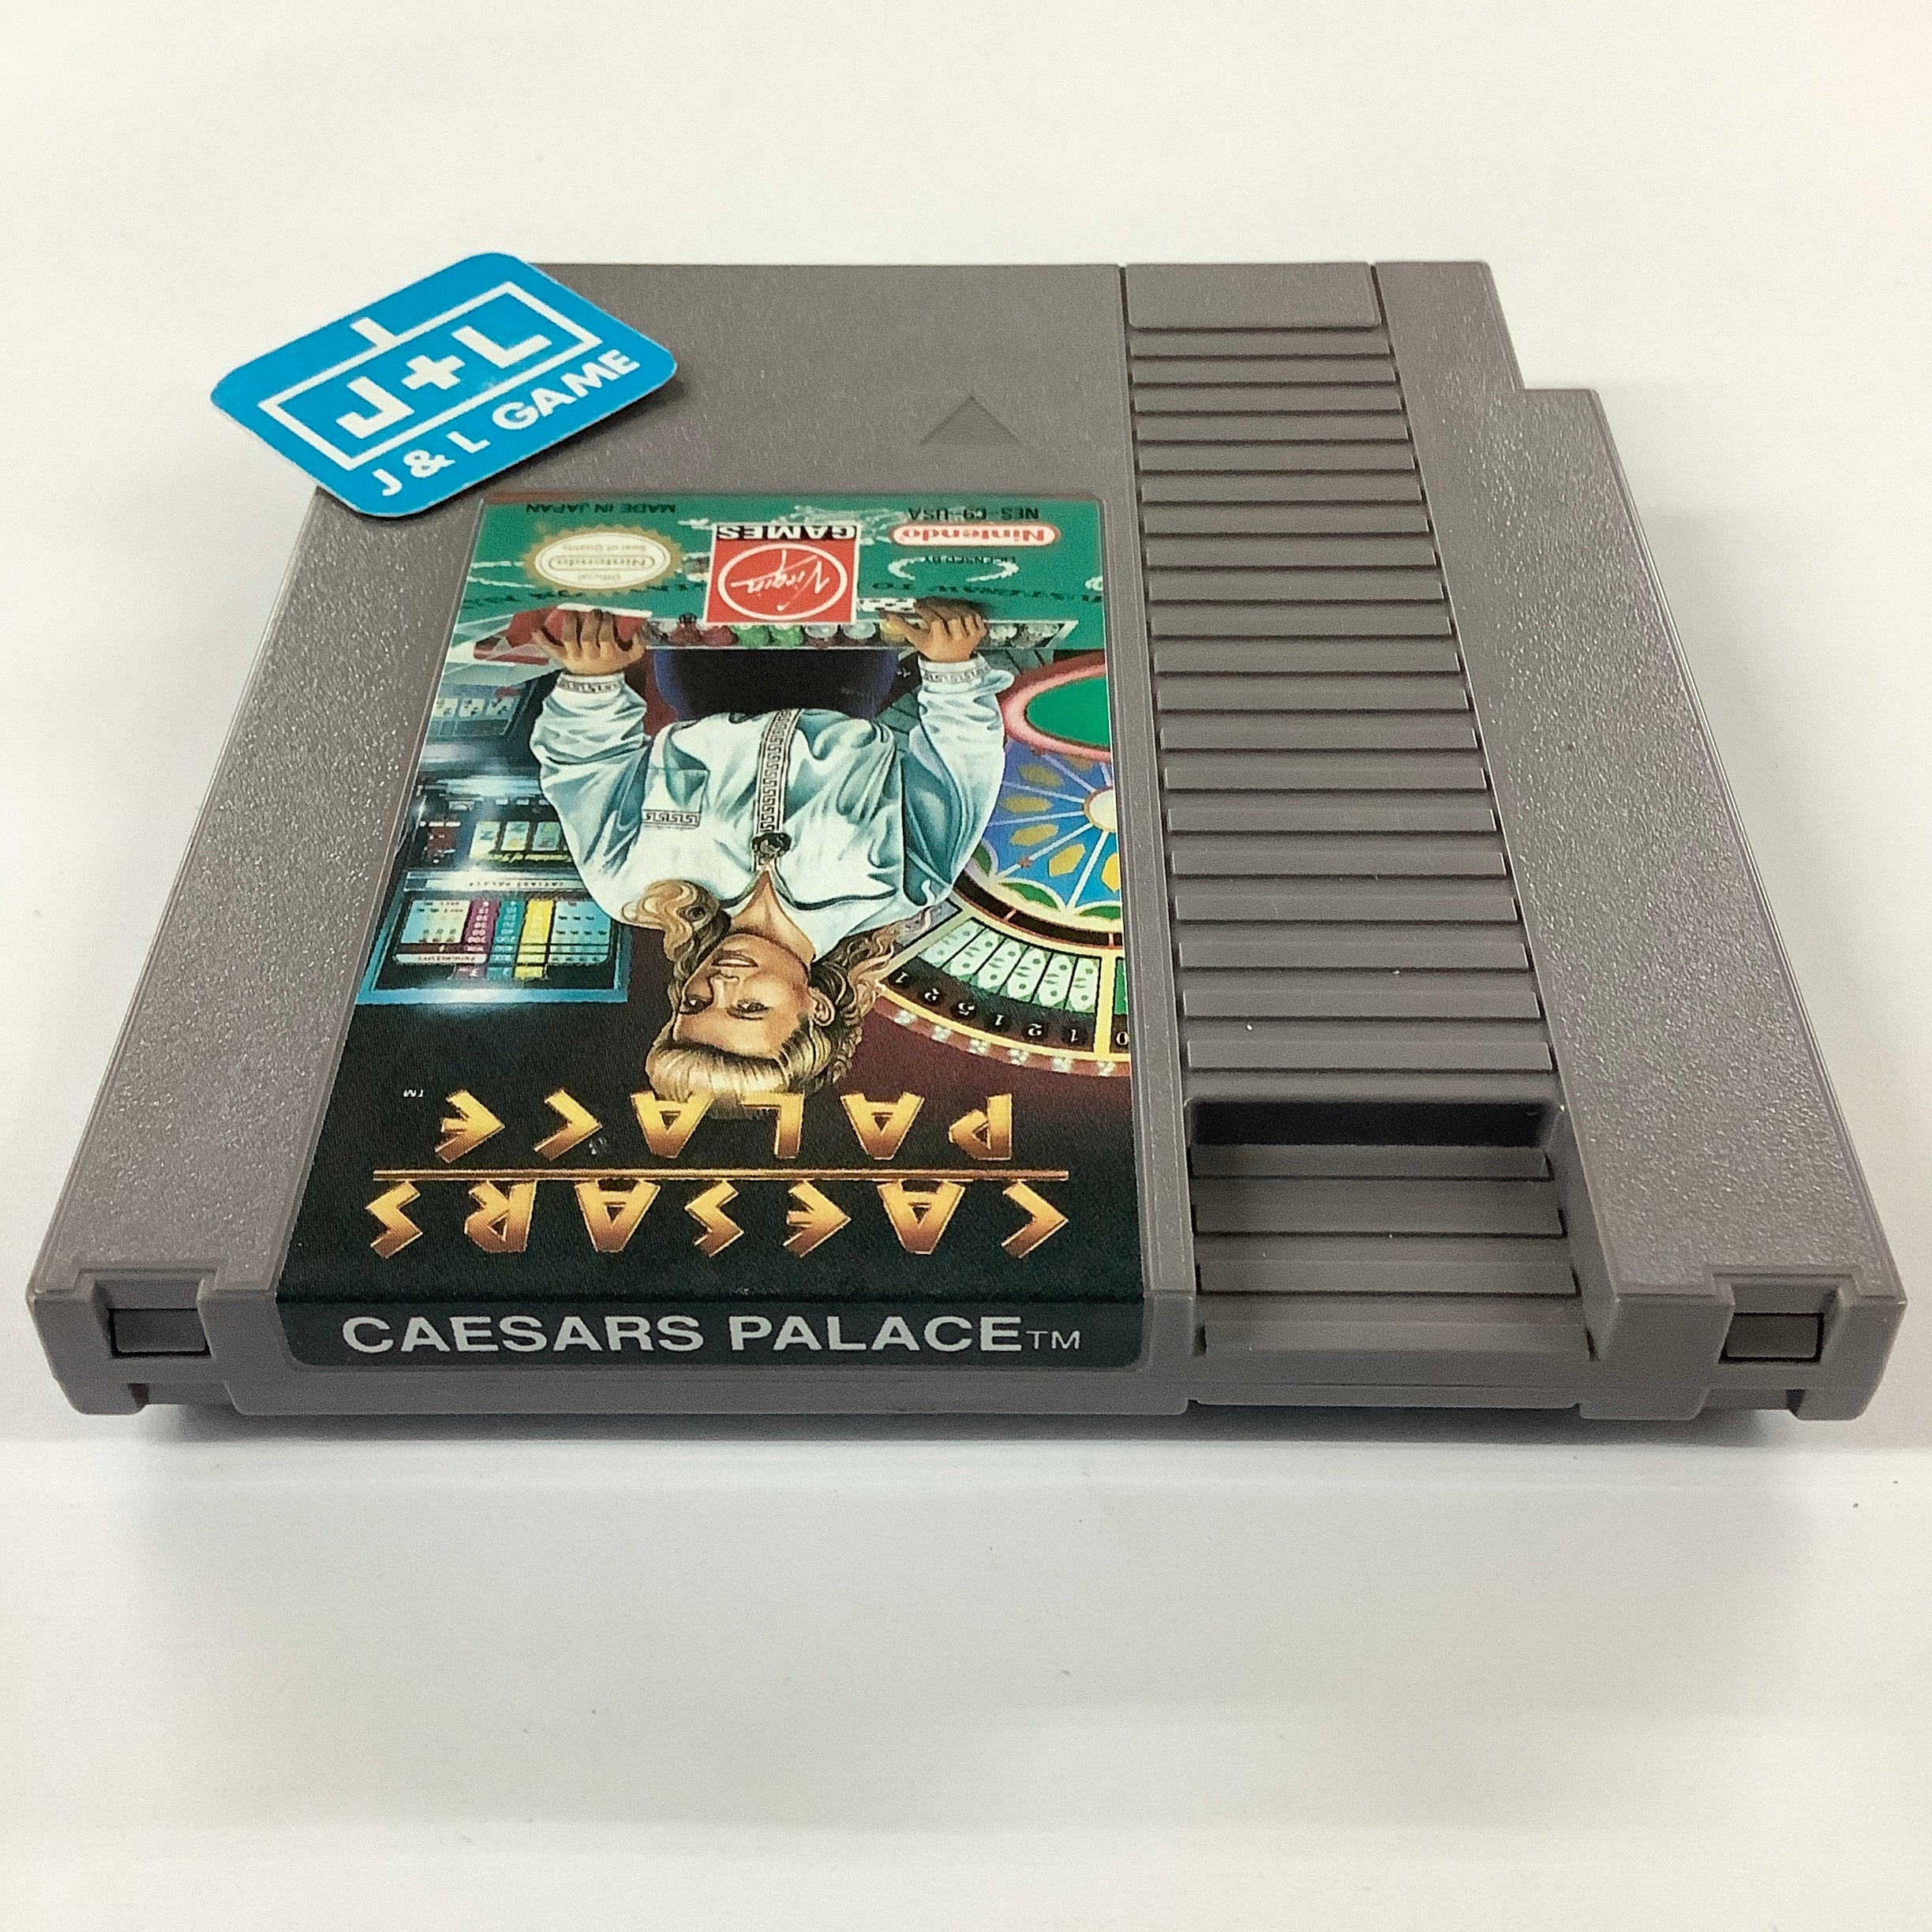 Caesars Palace - (NES) Nintendo Entertainment System [Pre-Owned] Video Games Virgin Games   